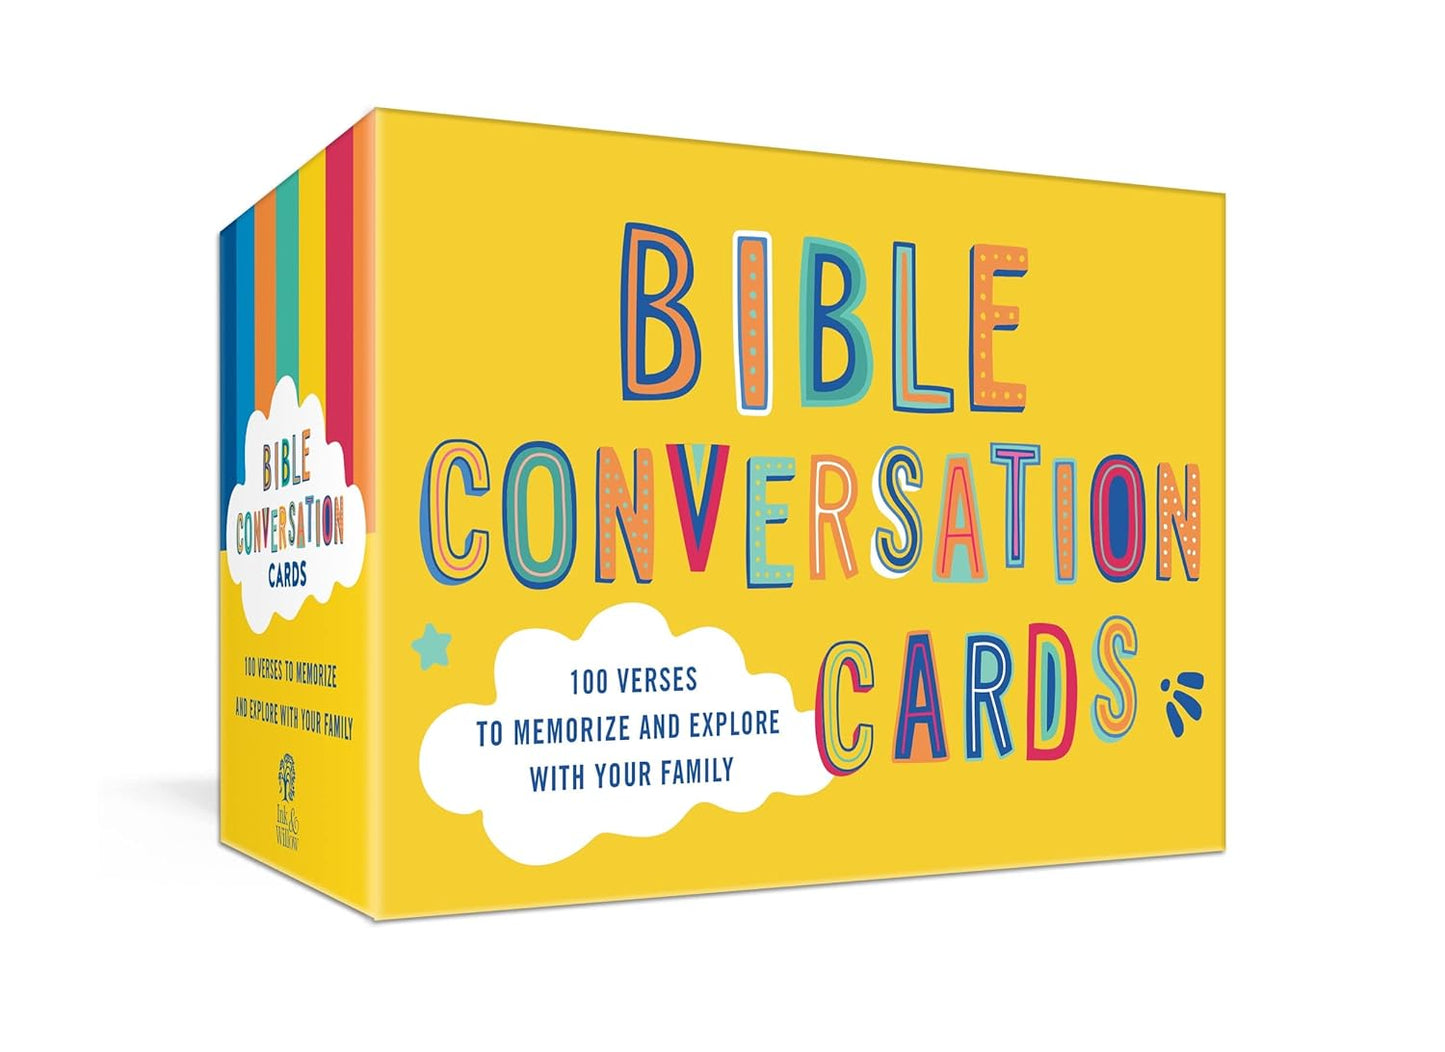 Bible Conversation Cards: 100 Verses to Memorize and Explore with Your Family claimedbygoddesigns